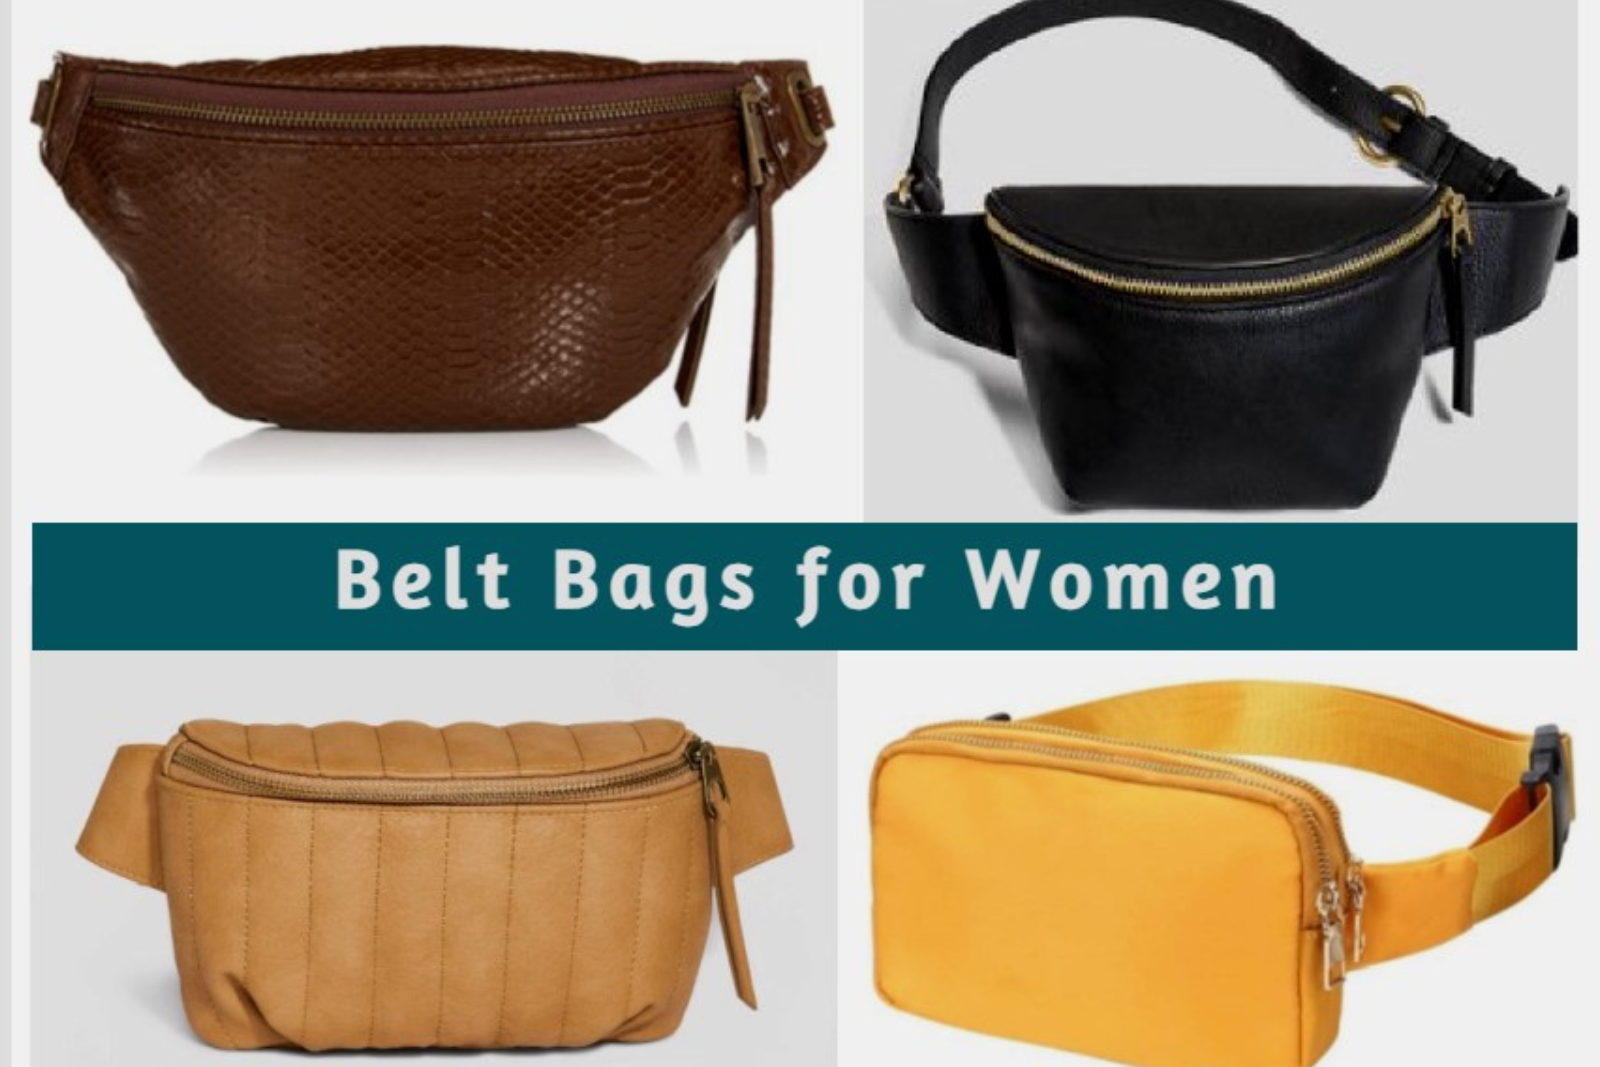 Belt Bags for Women-The Chic and Functional Accessory You Need